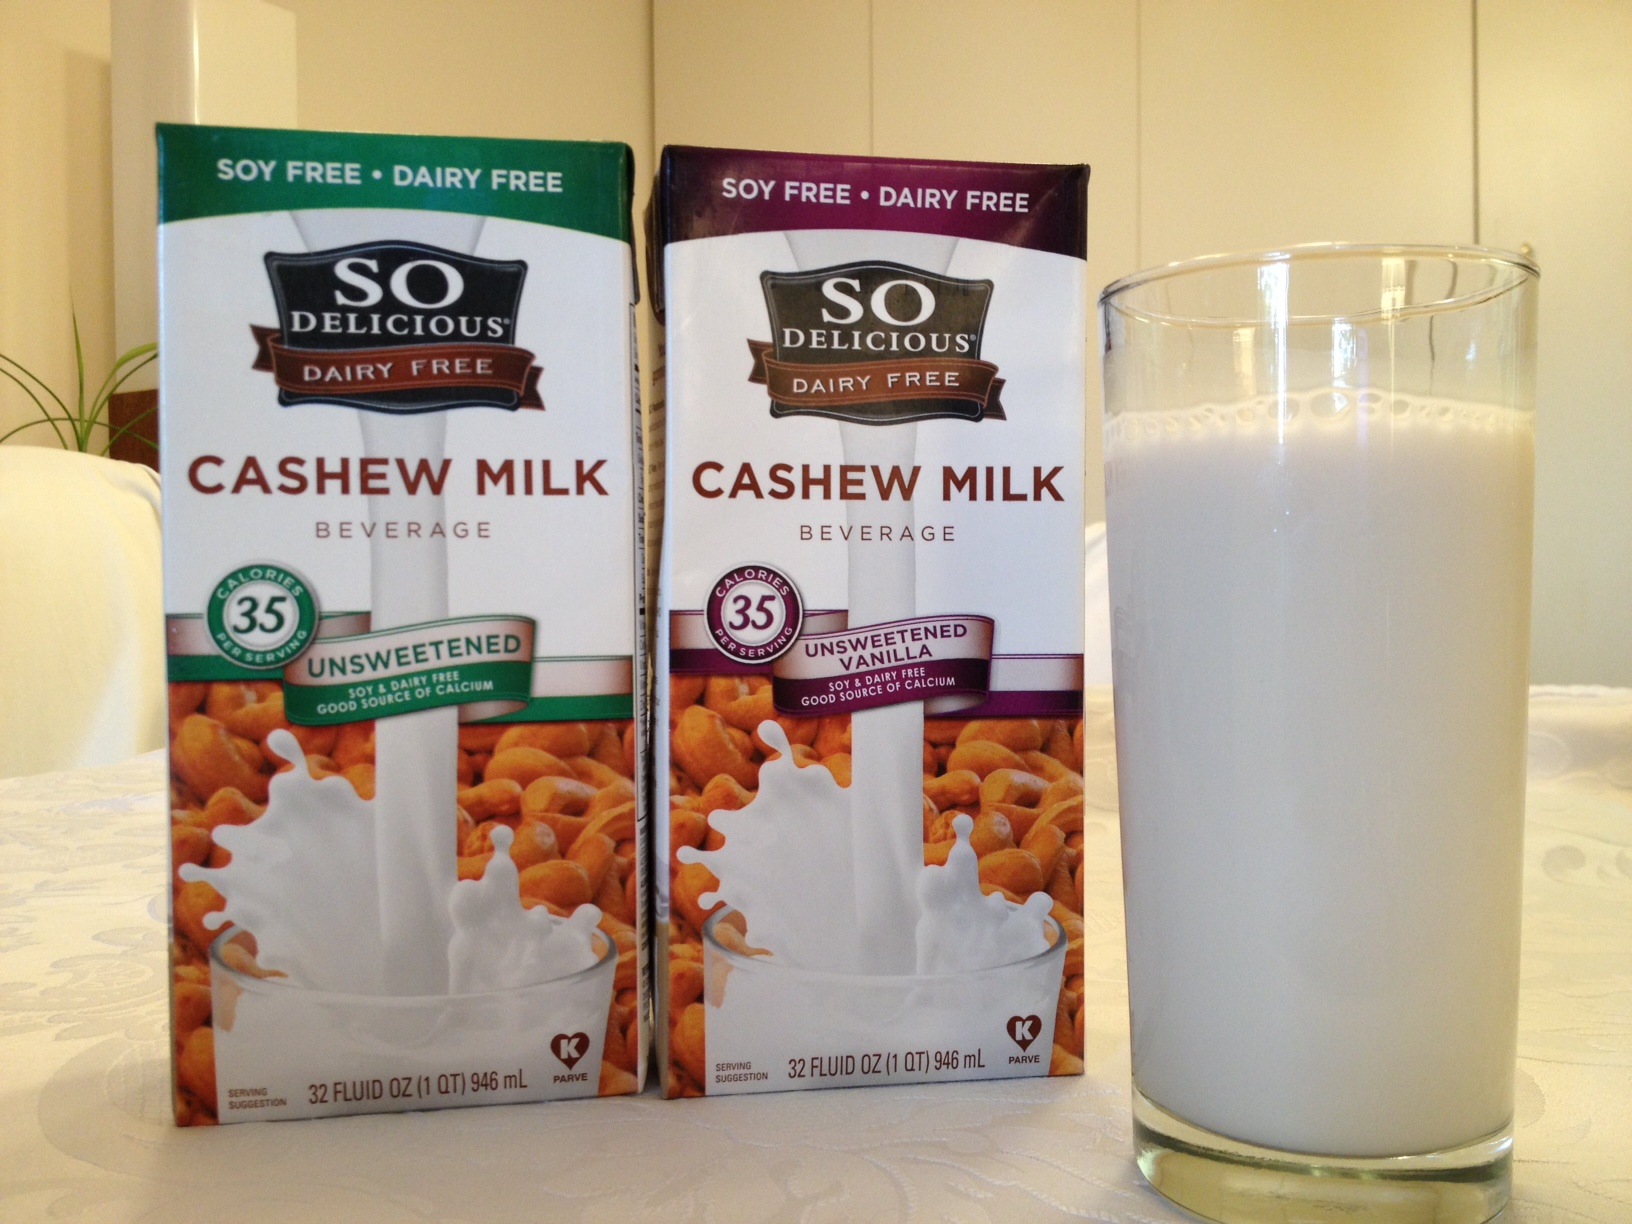 Cashew Nut Milks from So Delicious Dairy Free!